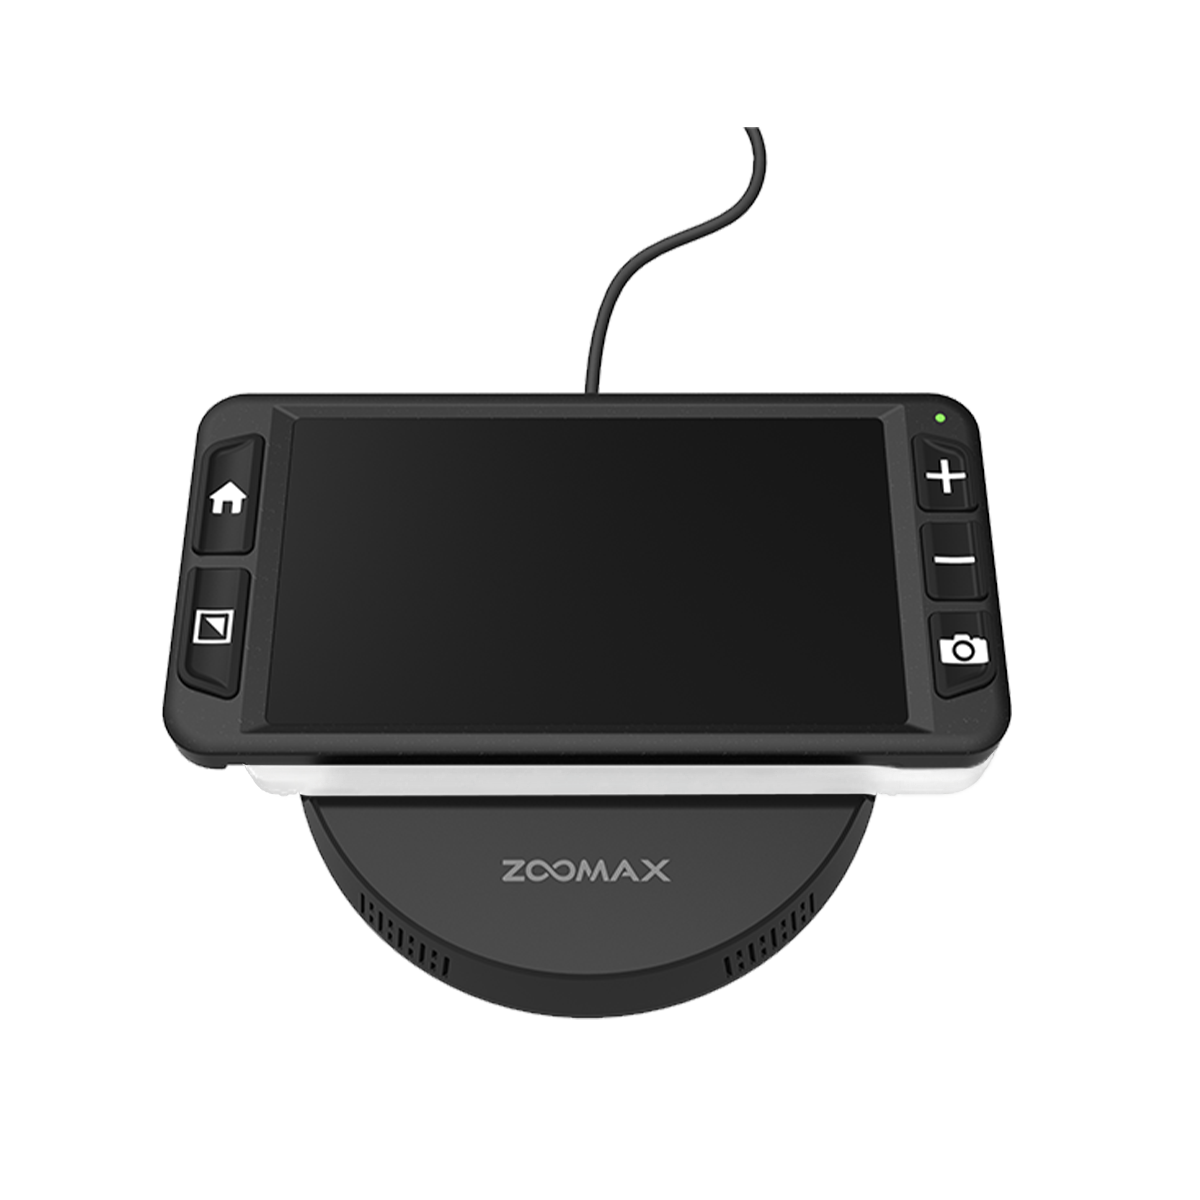 Zoomax Luna 6 handheld video magnifier on stand